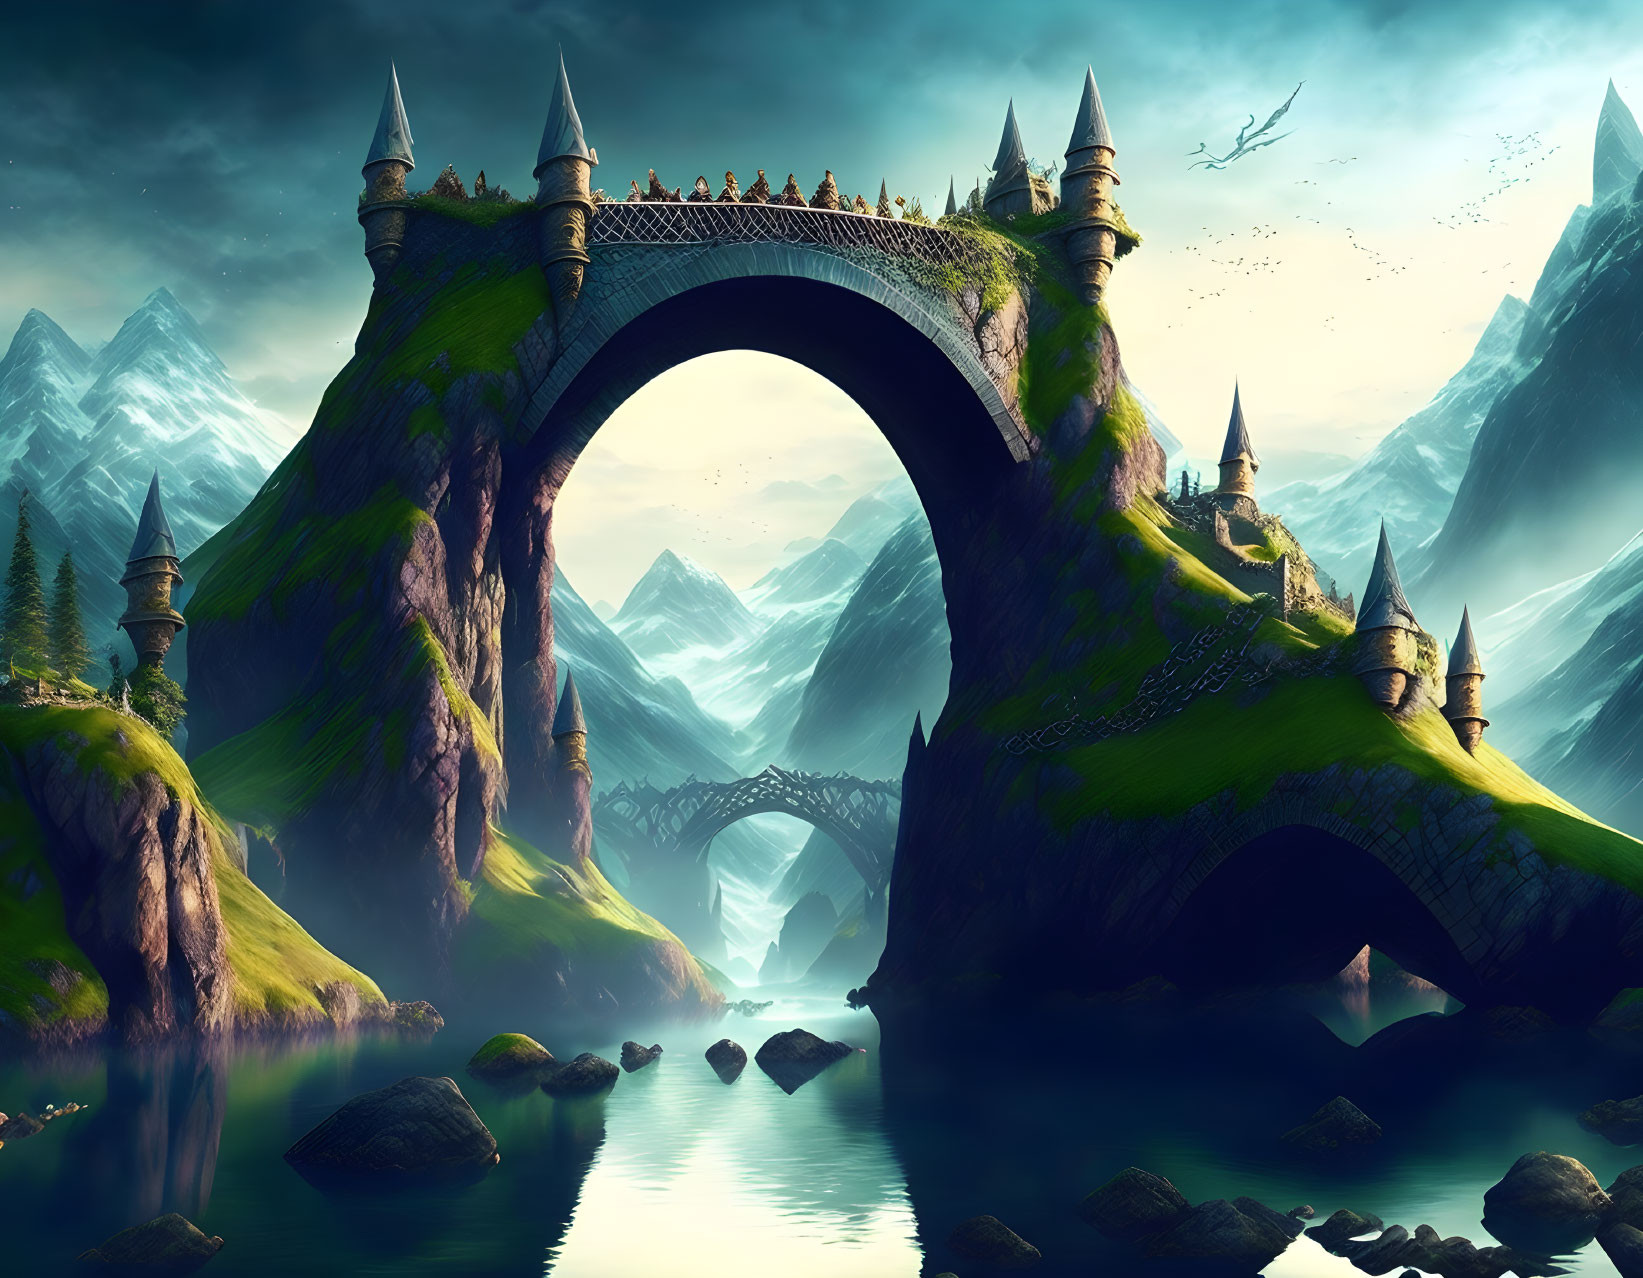 Fantasy landscape featuring towering arch bridge and majestic mountains.